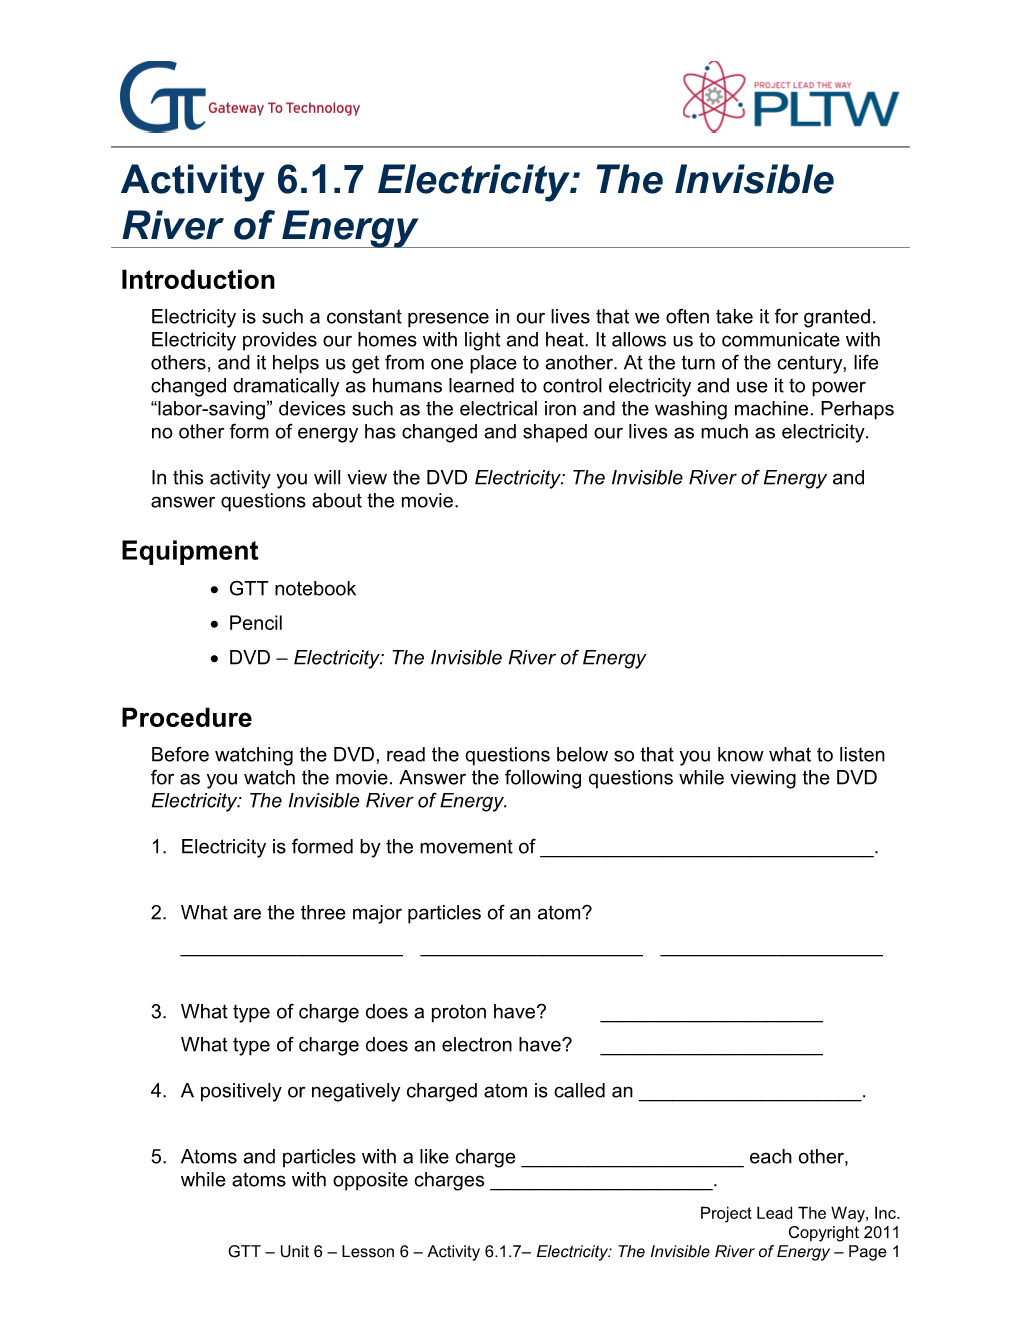 Activity 6.1.7 Electricity: the Invisible River of Energy